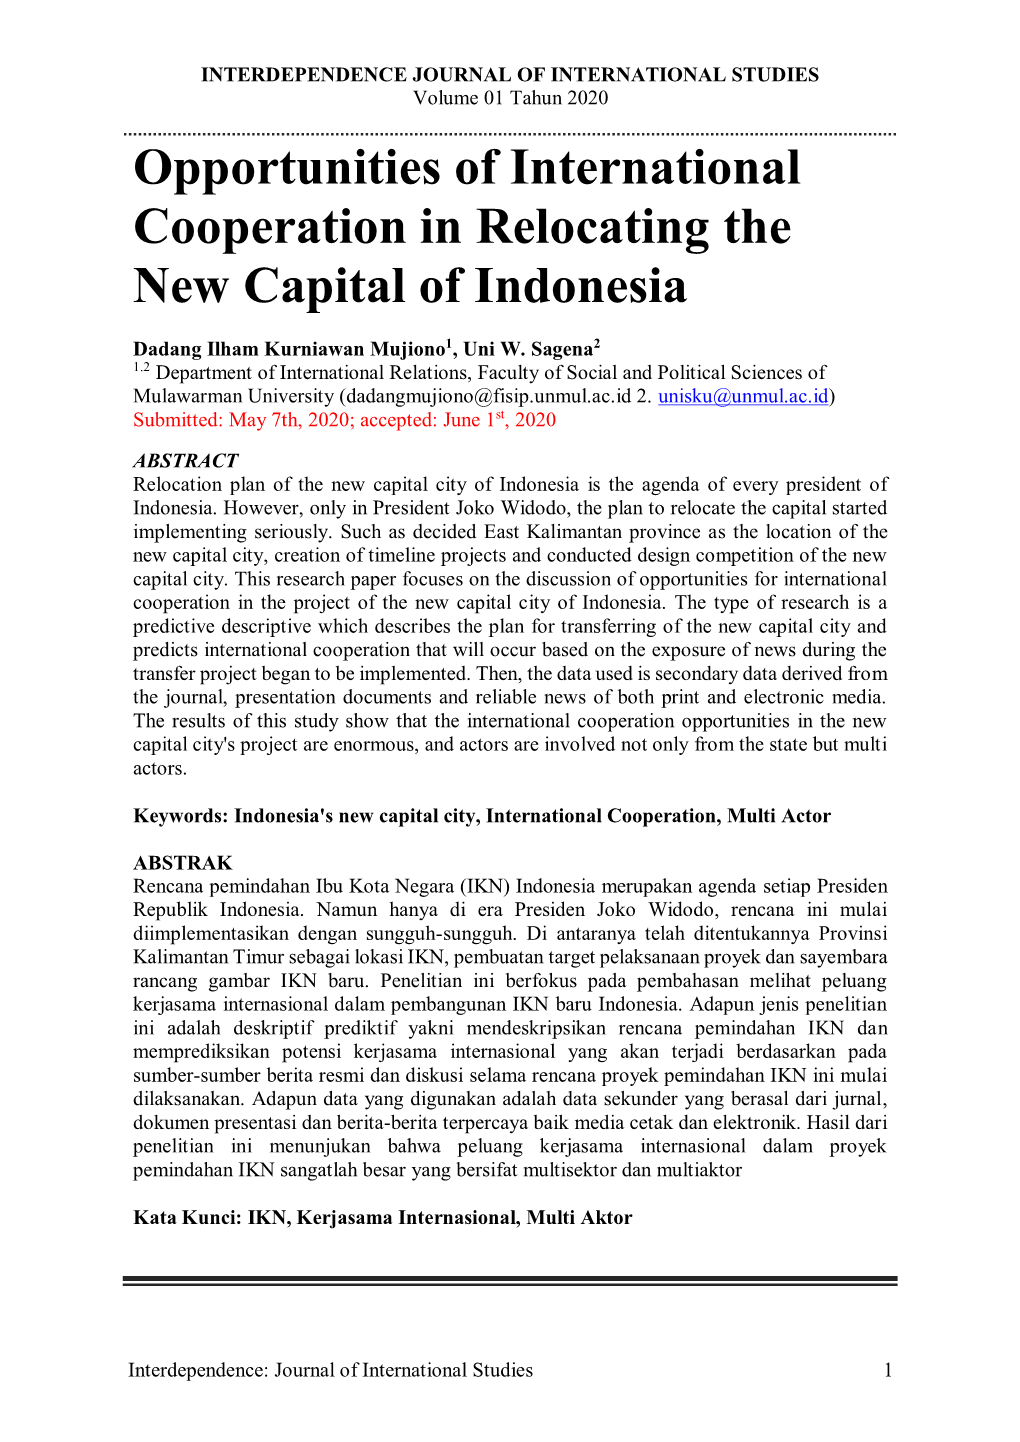 Opportunities of International Cooperation in Relocating the New Capital of Indonesia